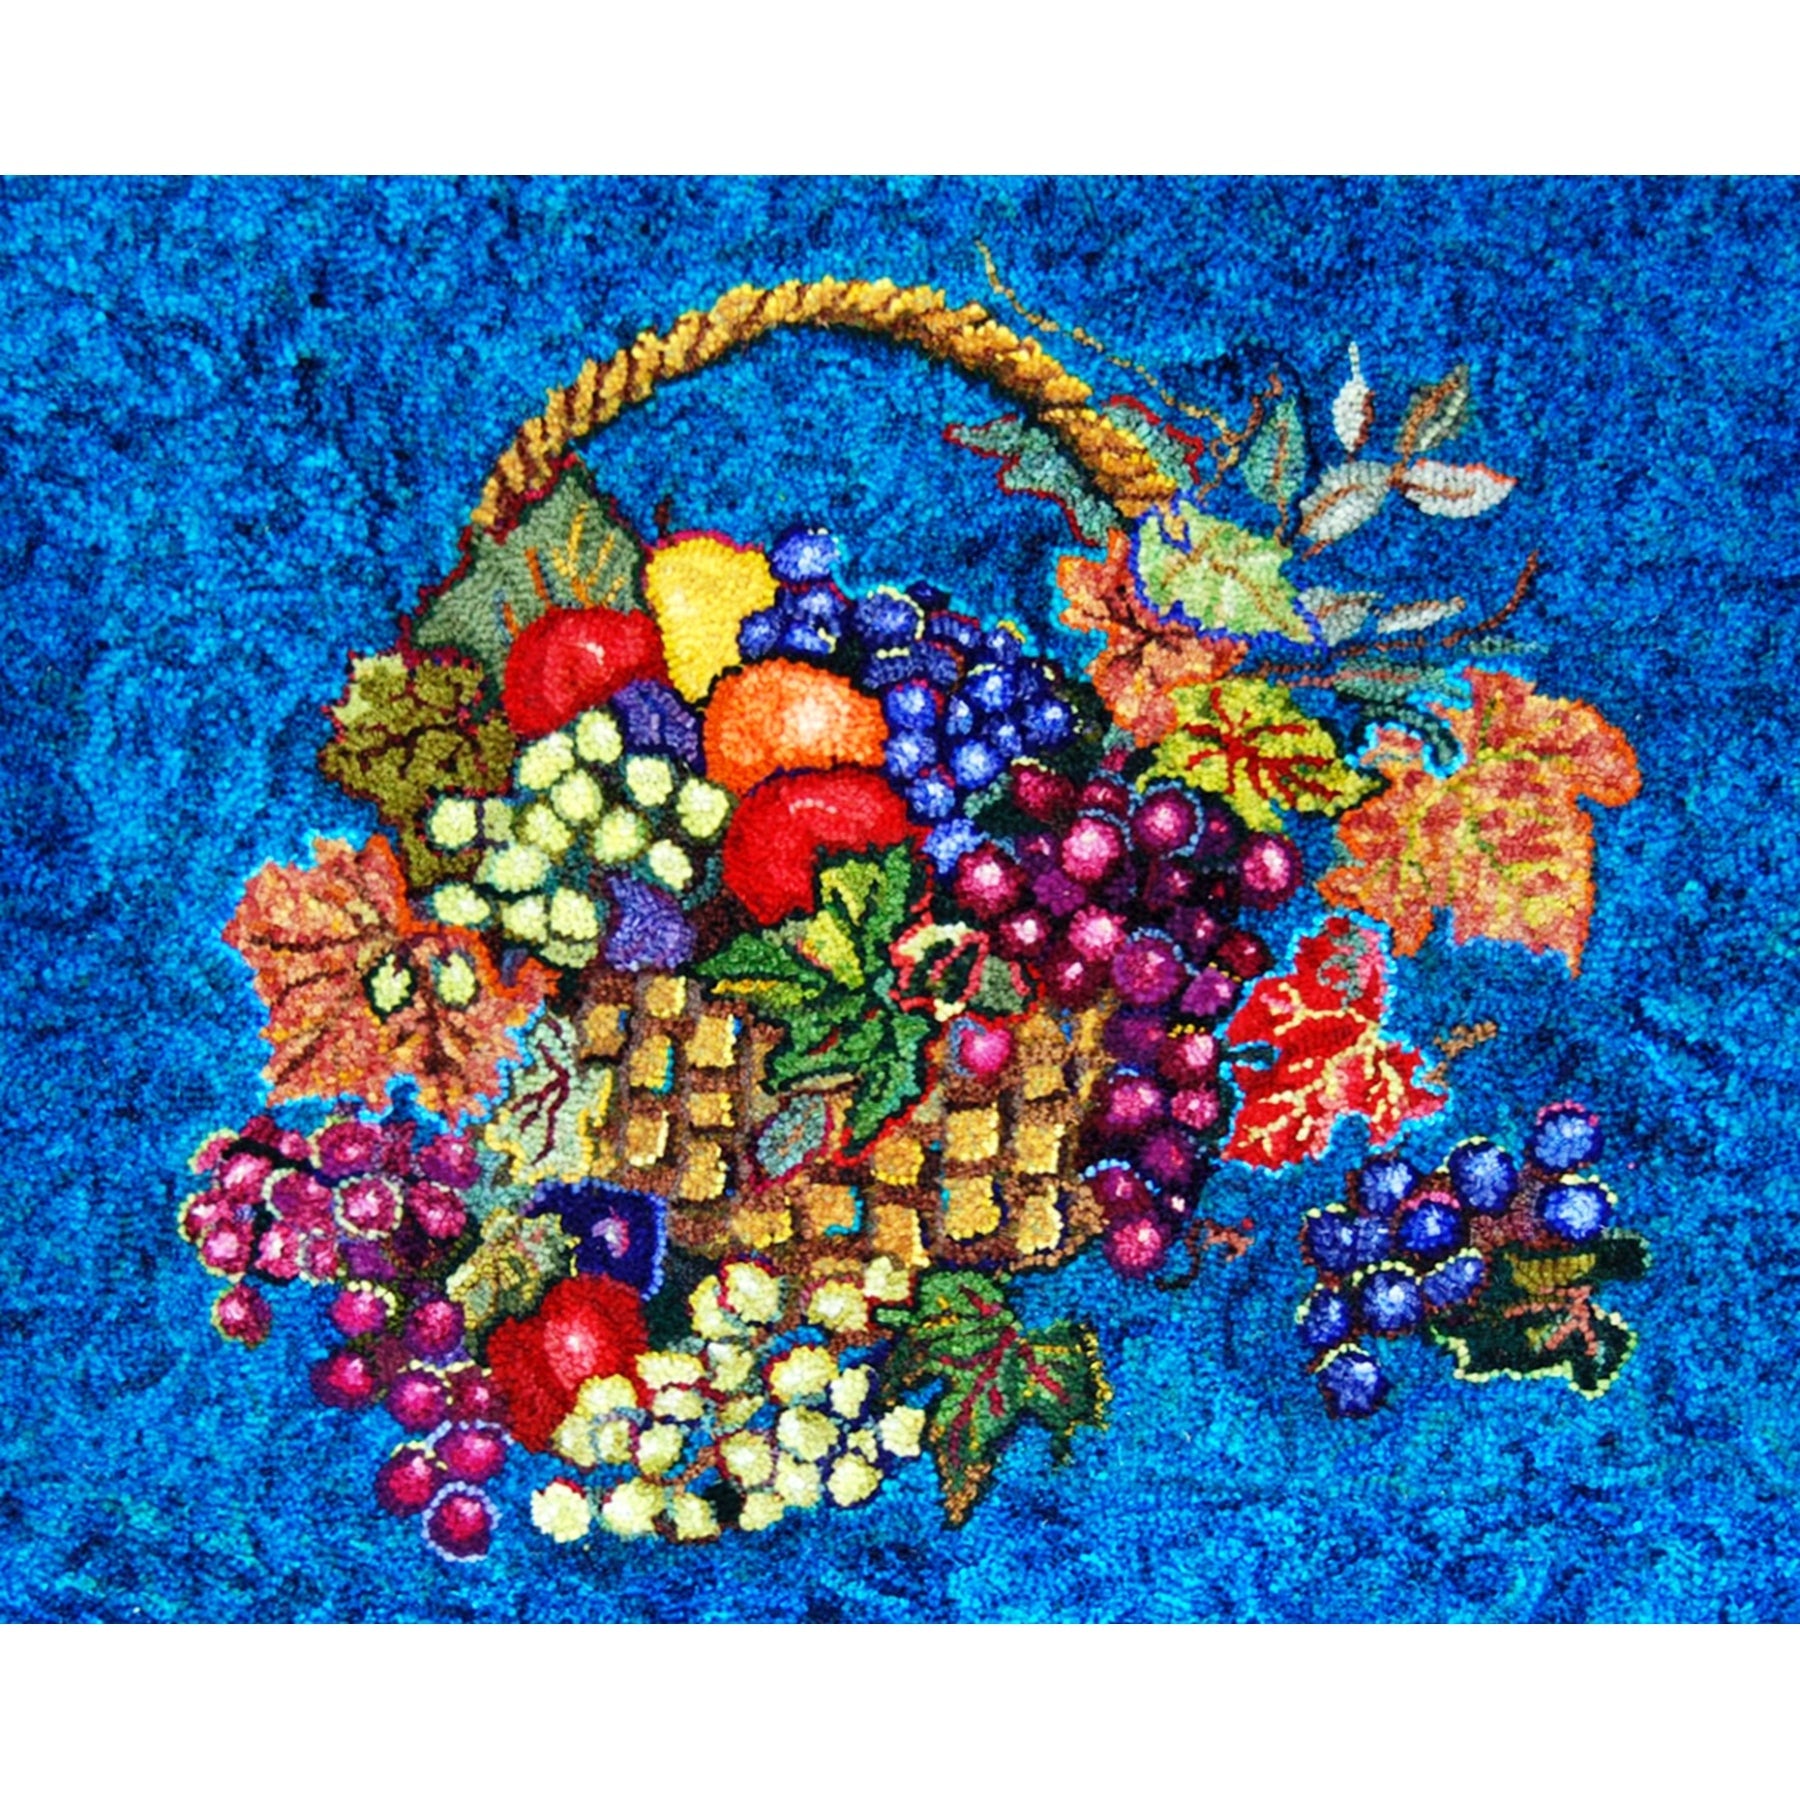 Basket of Fruit, rug hooked by Cheryl Bollenbach